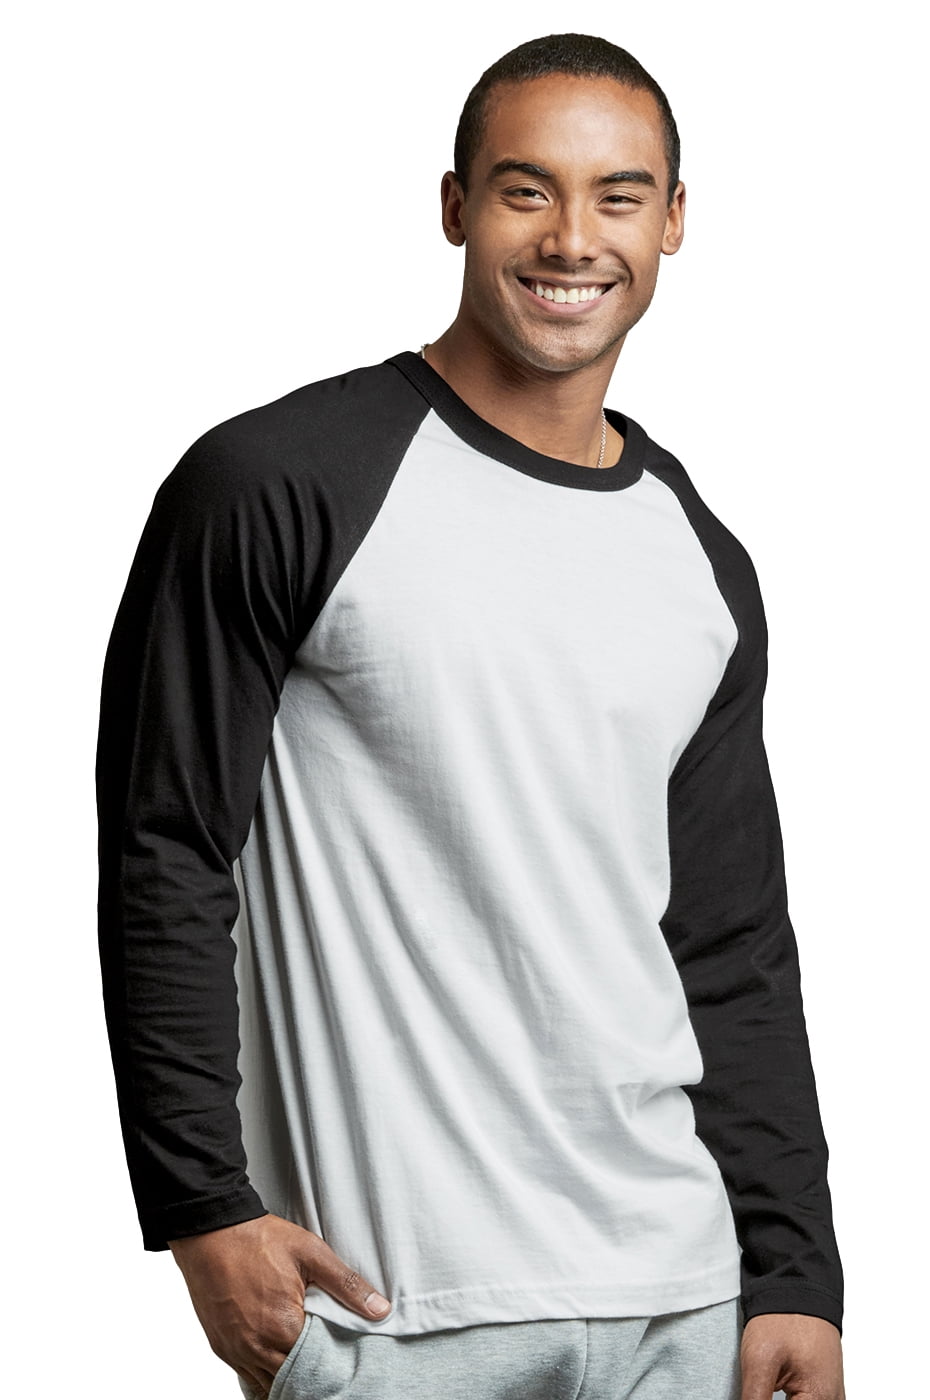 Black Raglan T-Shirts Short Sleeve Its All Fun and Games Until Someone Loses a Weiner Sports Sweat Tee for Kids Boys Girls